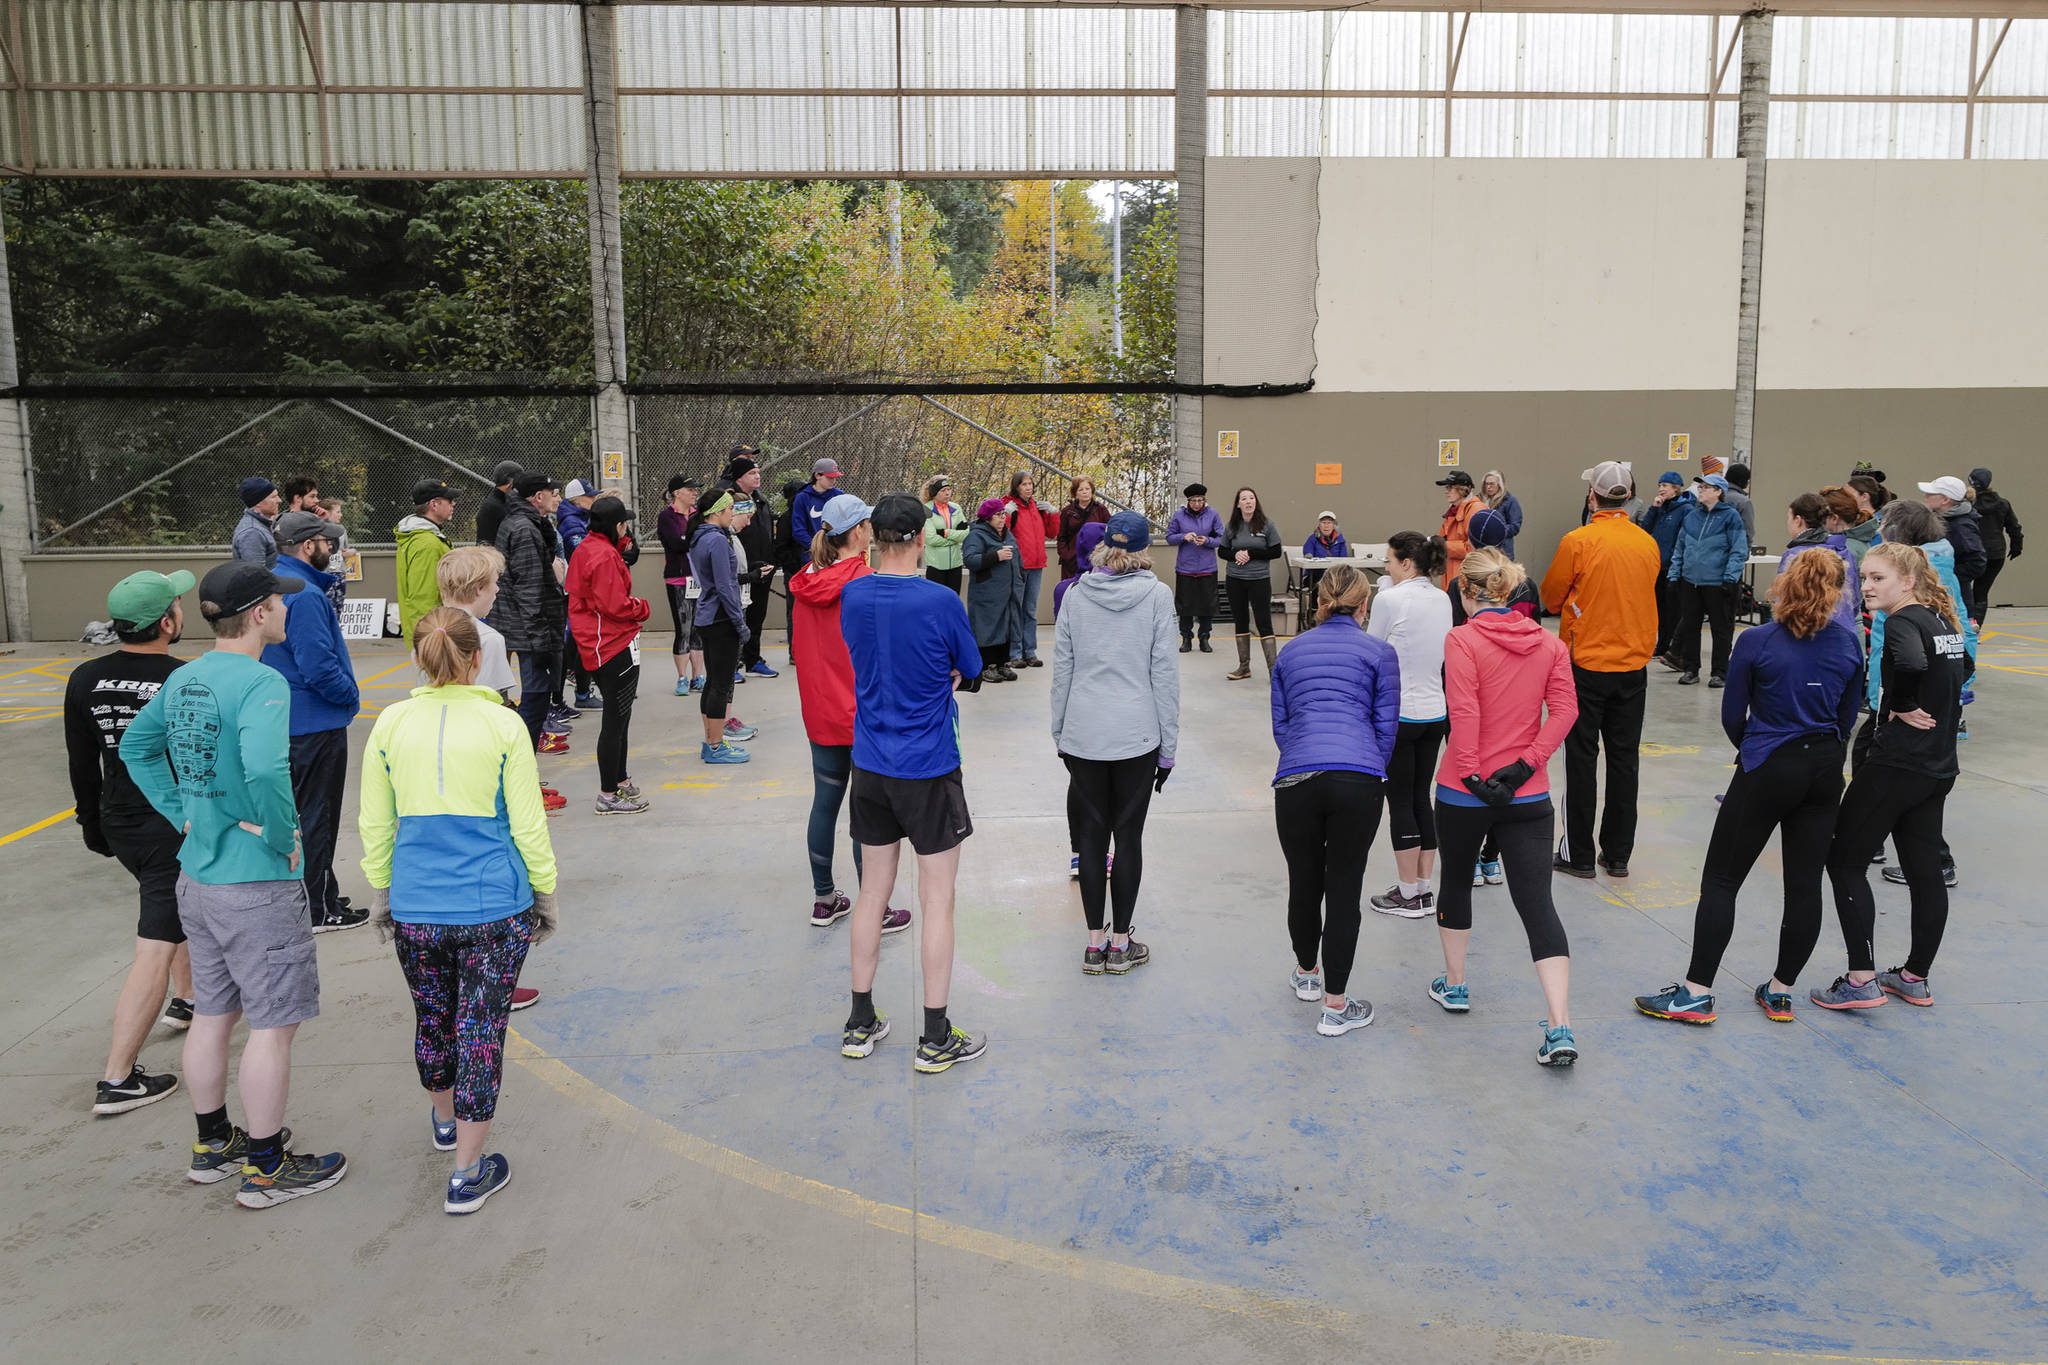 Juneau residents gather for pre-race instructions before the annual community mental health run, the Extra Tough 5K & 1 Mile Run, on Saturday, Oct. 12, 2019, at Riverbend Elementary School. The run is sponsored by National Alliance on Mental Illness (NAMI) Juneau. (Michael Penn | Juneau Empire)